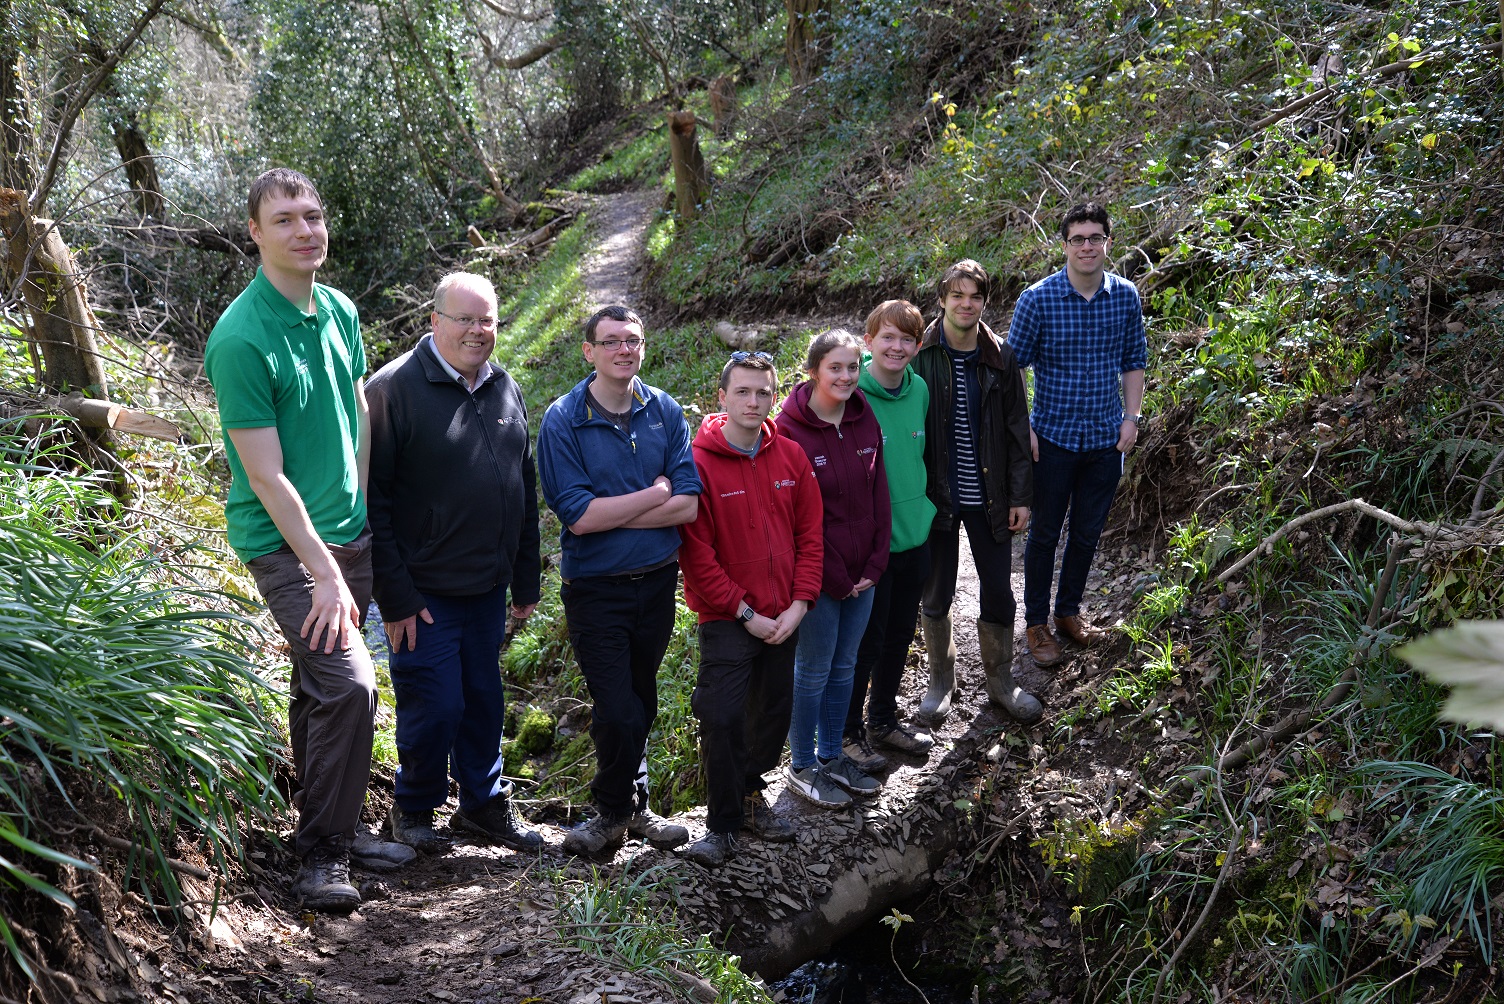 Student volunteers from Aberystwyth University helped reopen a new path through Penglais Nature Park in 2017.